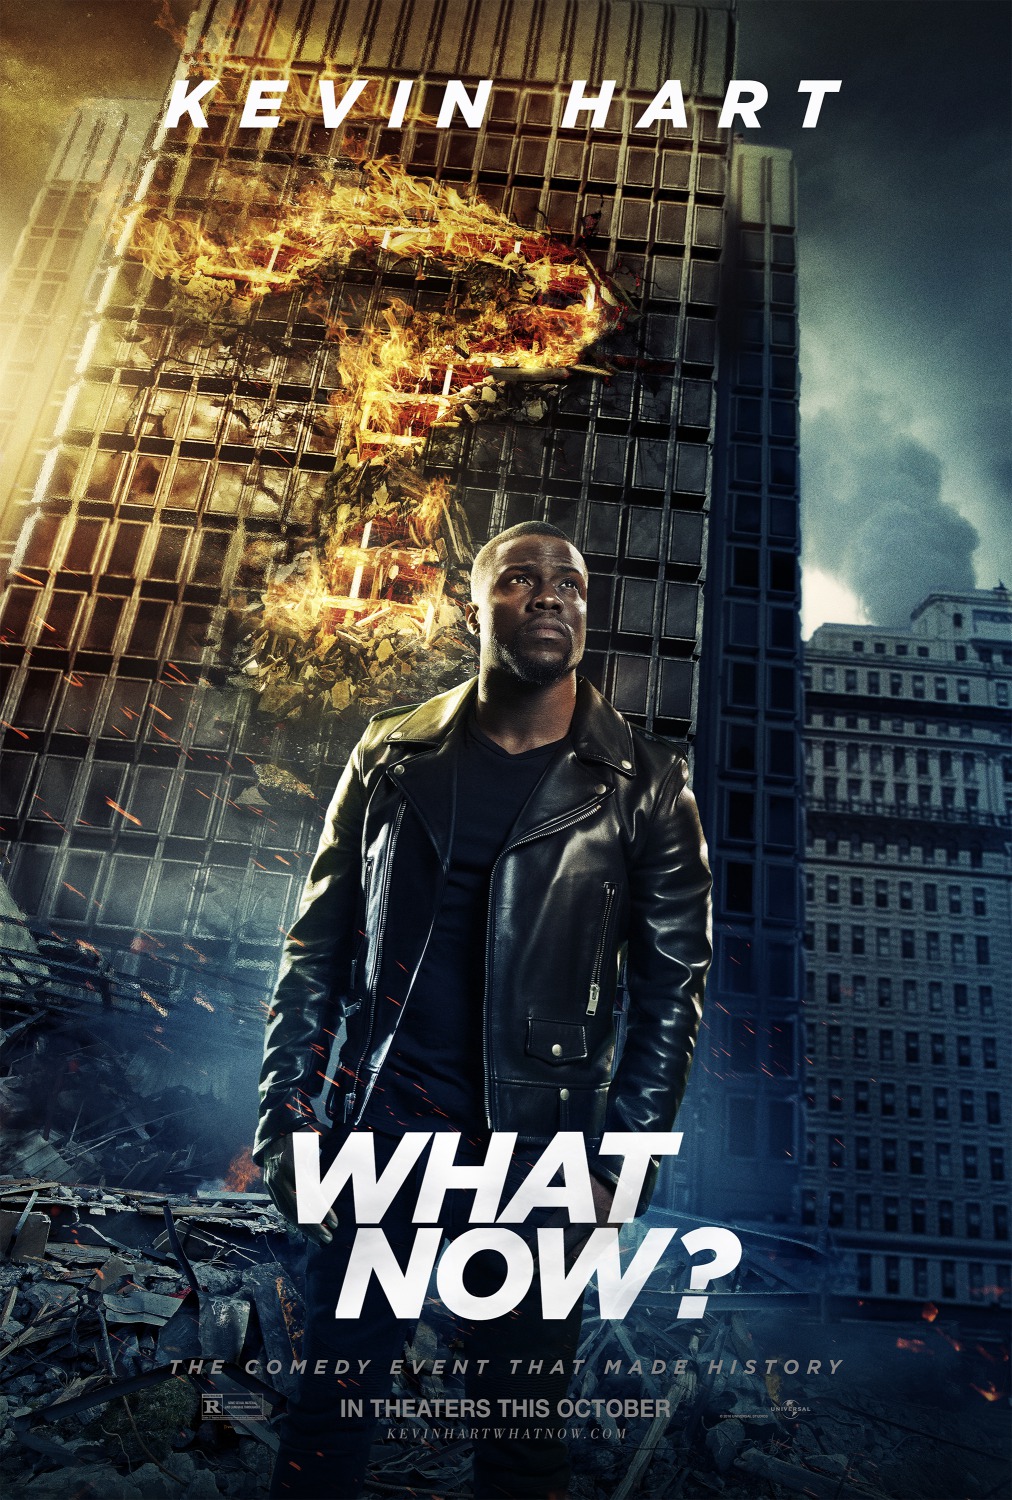 KEVIN HART WHAT NOW ? Trailers and Posters The Entertainment Factor